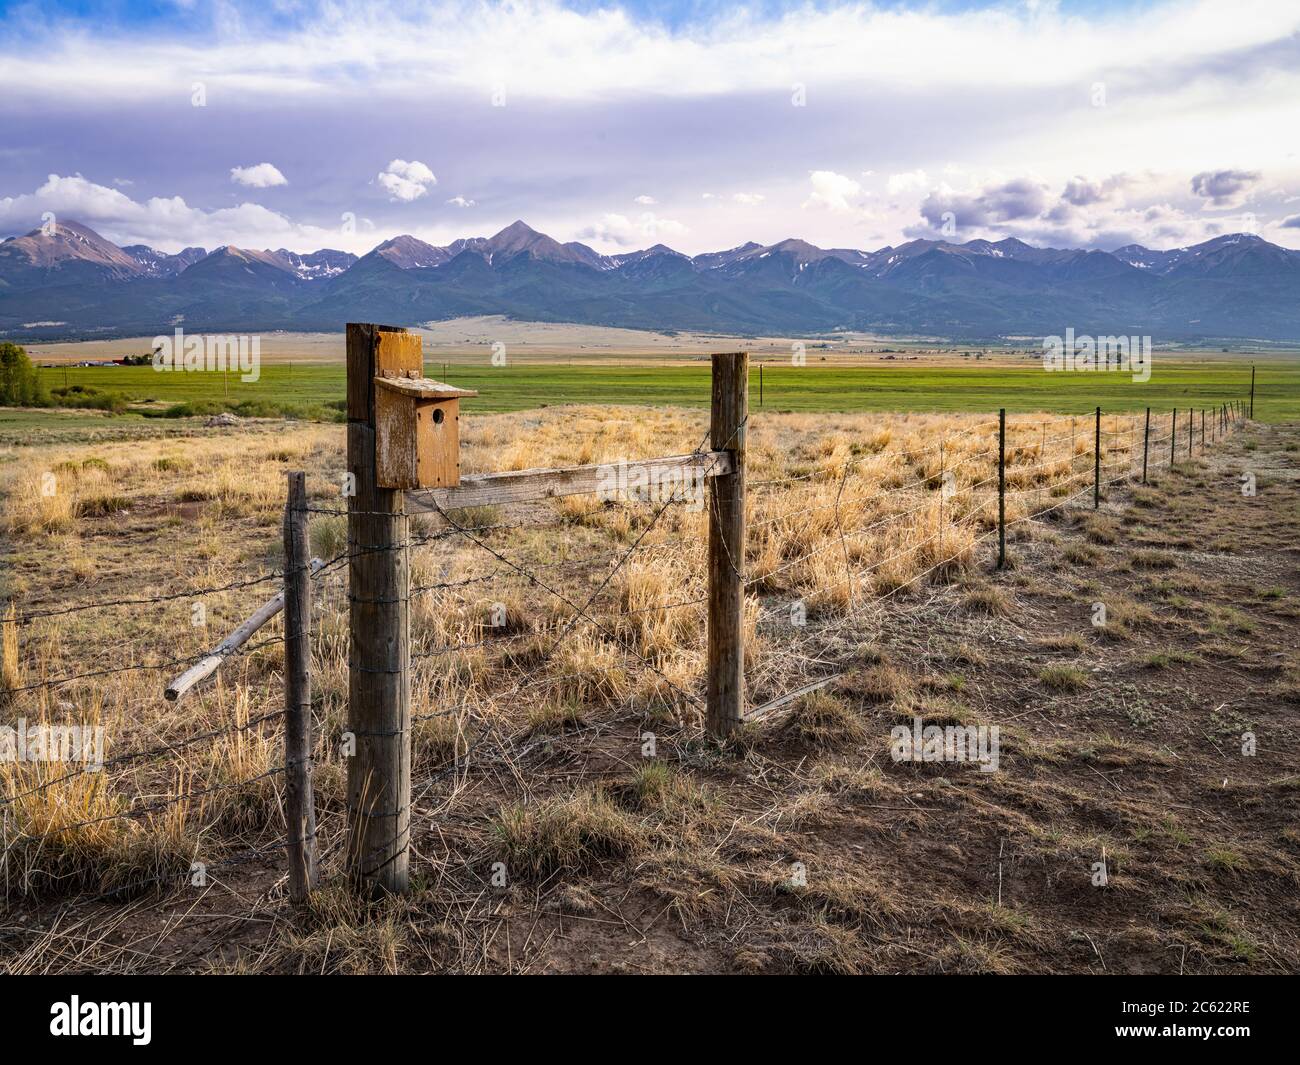 Bird house on post of barbed wire fence, with mountains. Colorado, USA Stock Photo